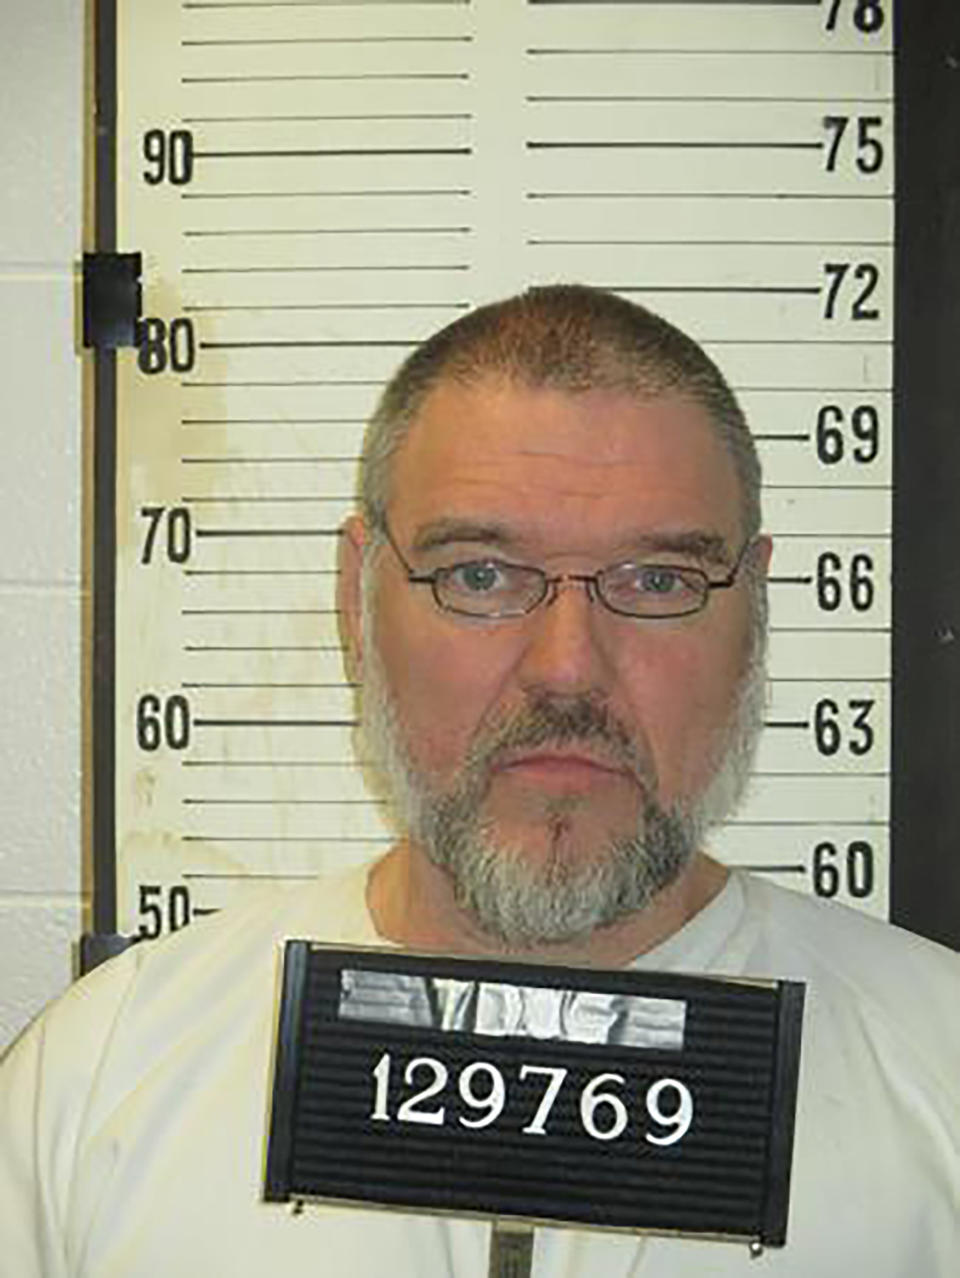 This photo provided by the Tennessee Department of Corrections shows Donald Middlebrooks. Tennessee last week set three new execution dates for inmates in 2022, driving the total number of executions planned this year to five. The state had temporarily halted executions during the pandemic but is currently planning one execution every other month beginning in April. Last week, the Tennessee Supreme Court set execution dates for Donald Middlebrooks, Byron Black, and Gary Wayne Sutton. (Tennessee Department of Corrections via AP)